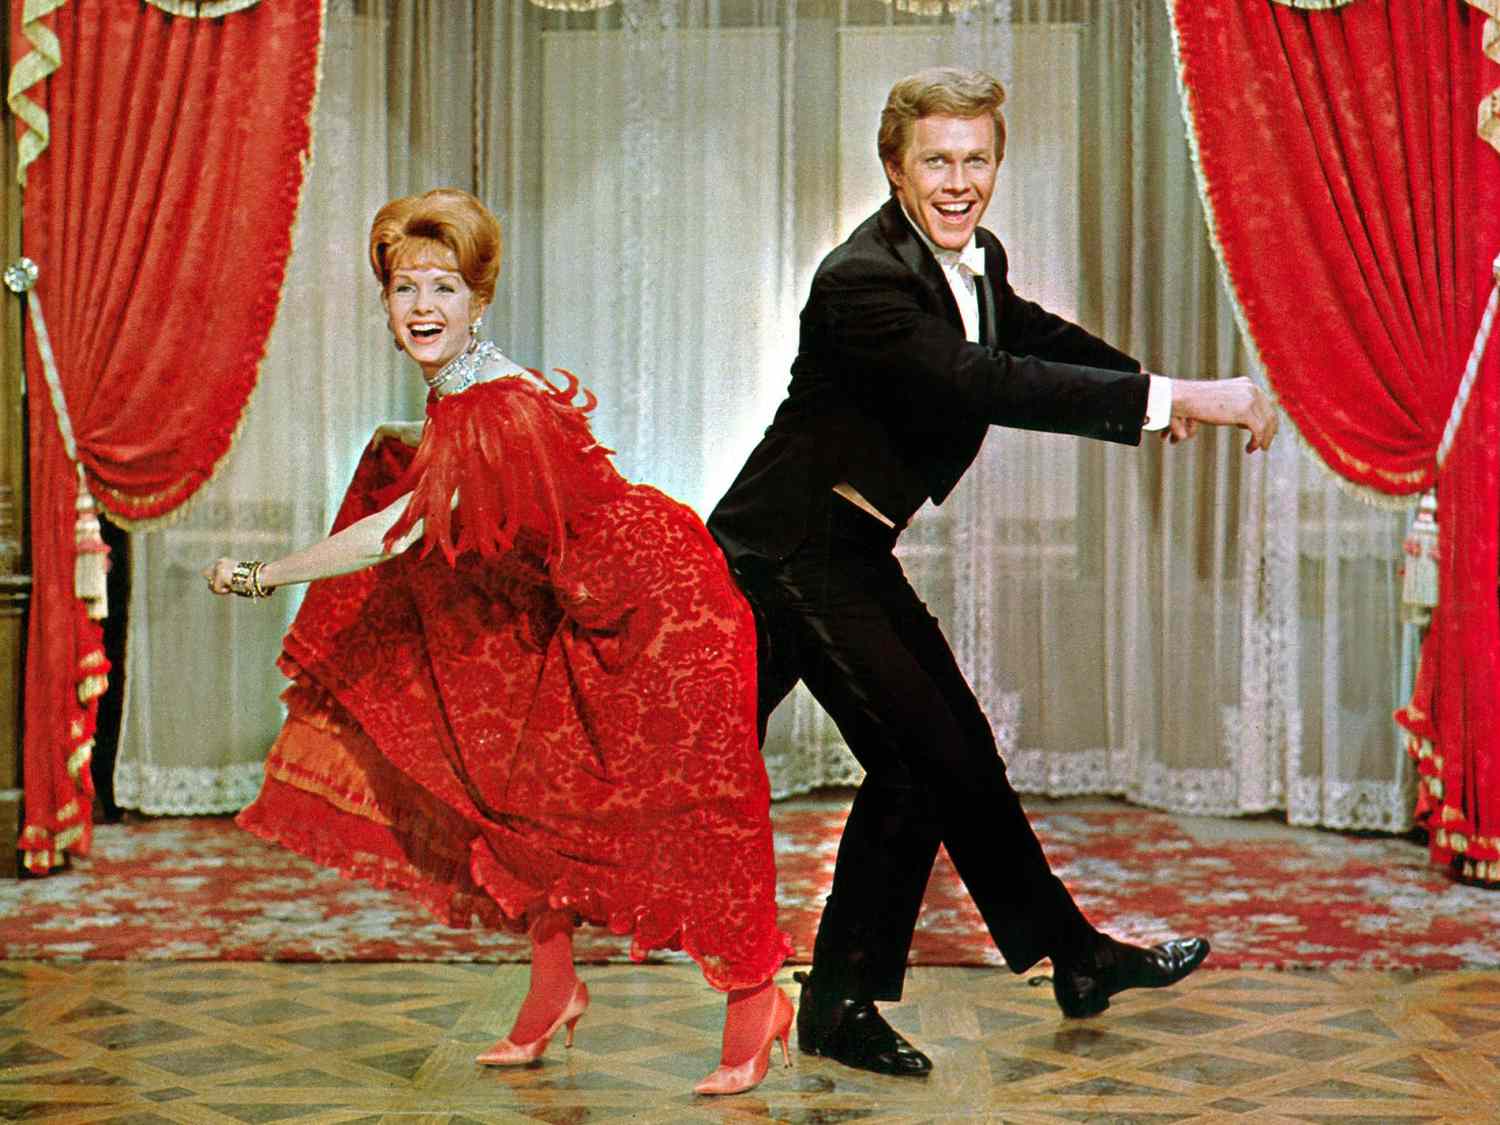 THE UNSINKABLE MOLLY BROWN, Debbie Reynolds, Harve Presnell, 1964